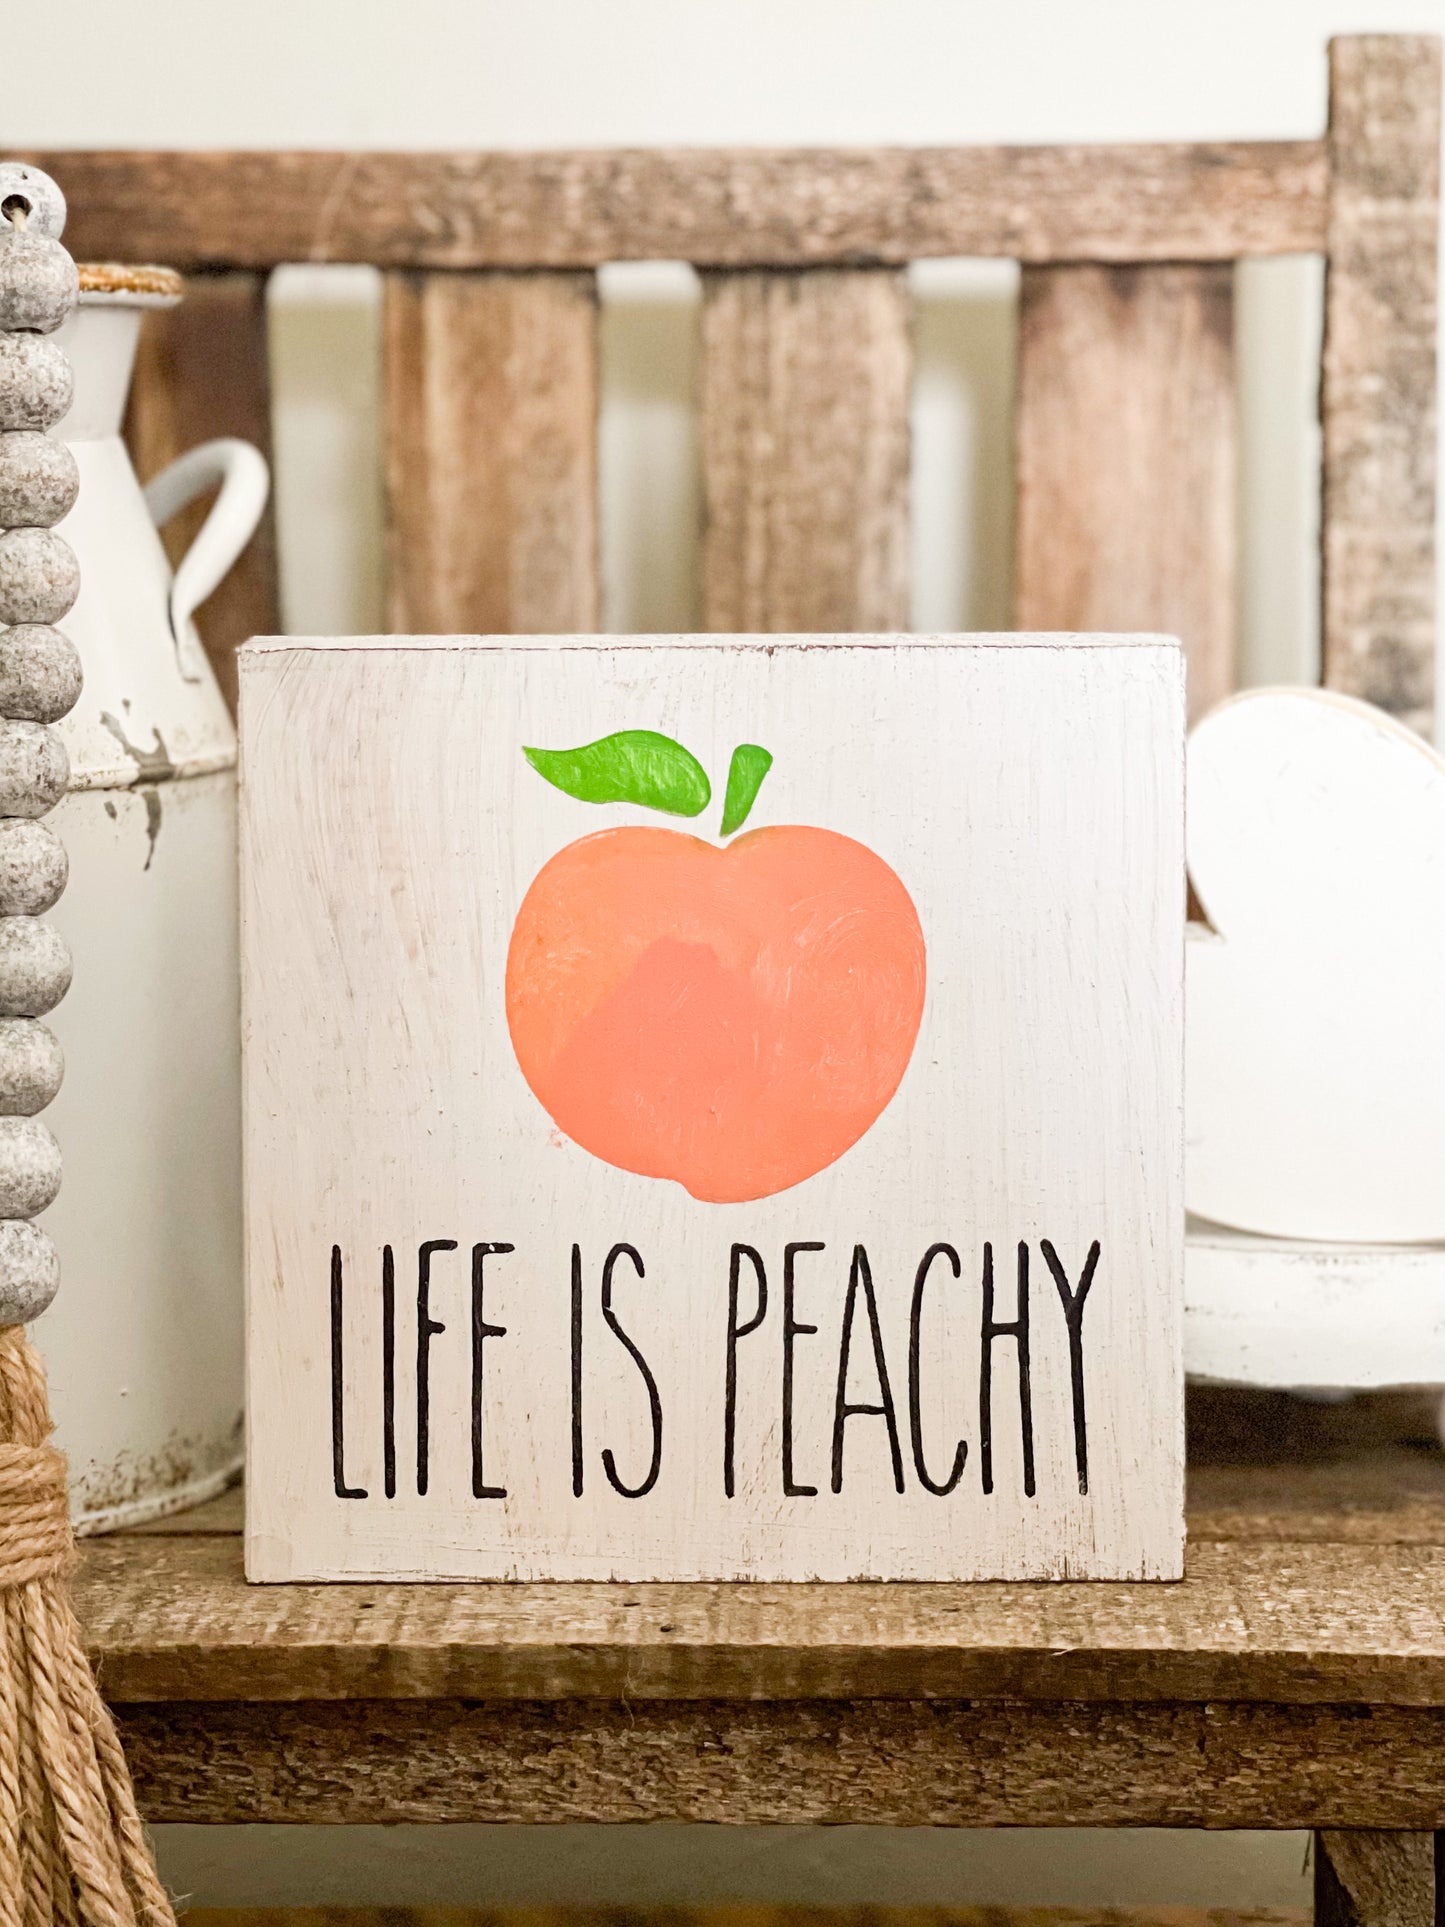 Life is peachy sign